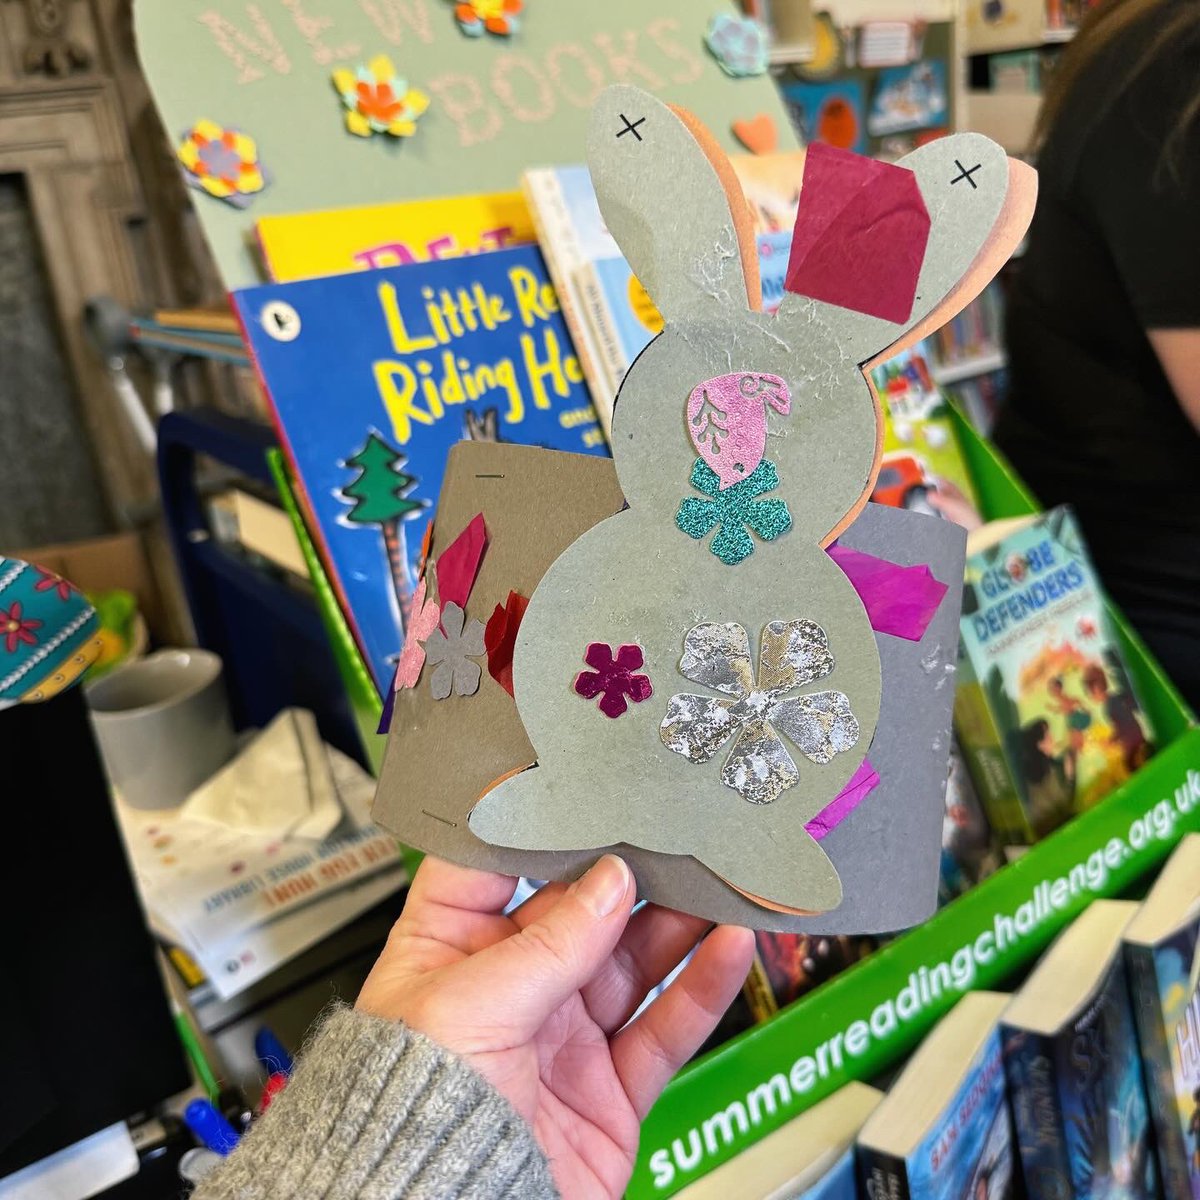 We celebrated ‘Bunnies in the bed’ at #CharltonLibrary on Saturday with #CABAHS, #Frillys and @CharltonHouseGW! For #LibraryFunClub we made Easter bunny hats ready for the bonnet parade using different materials 🎨🐰 We have crafts every Tuesday, Friday + Saturday at 10.30am! 🐥